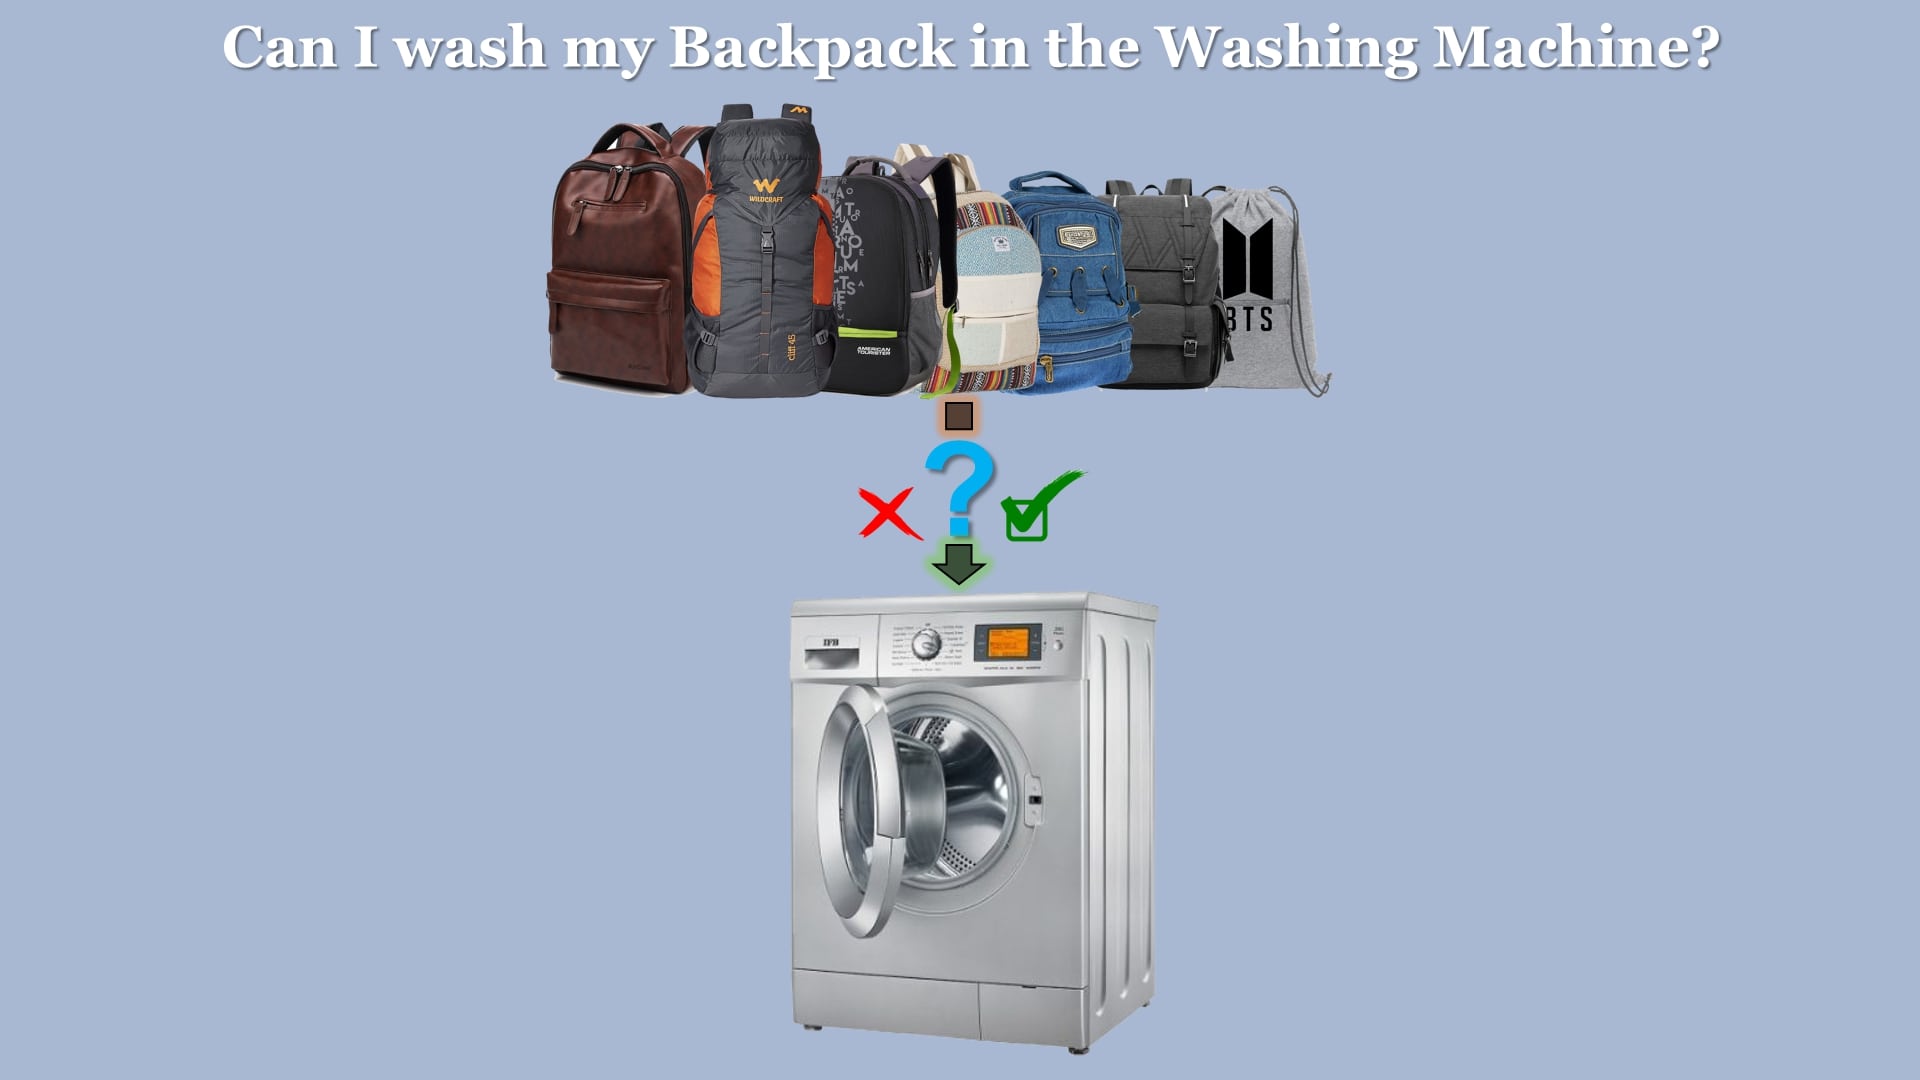 Can I wash my Backpack in the Washing Machine